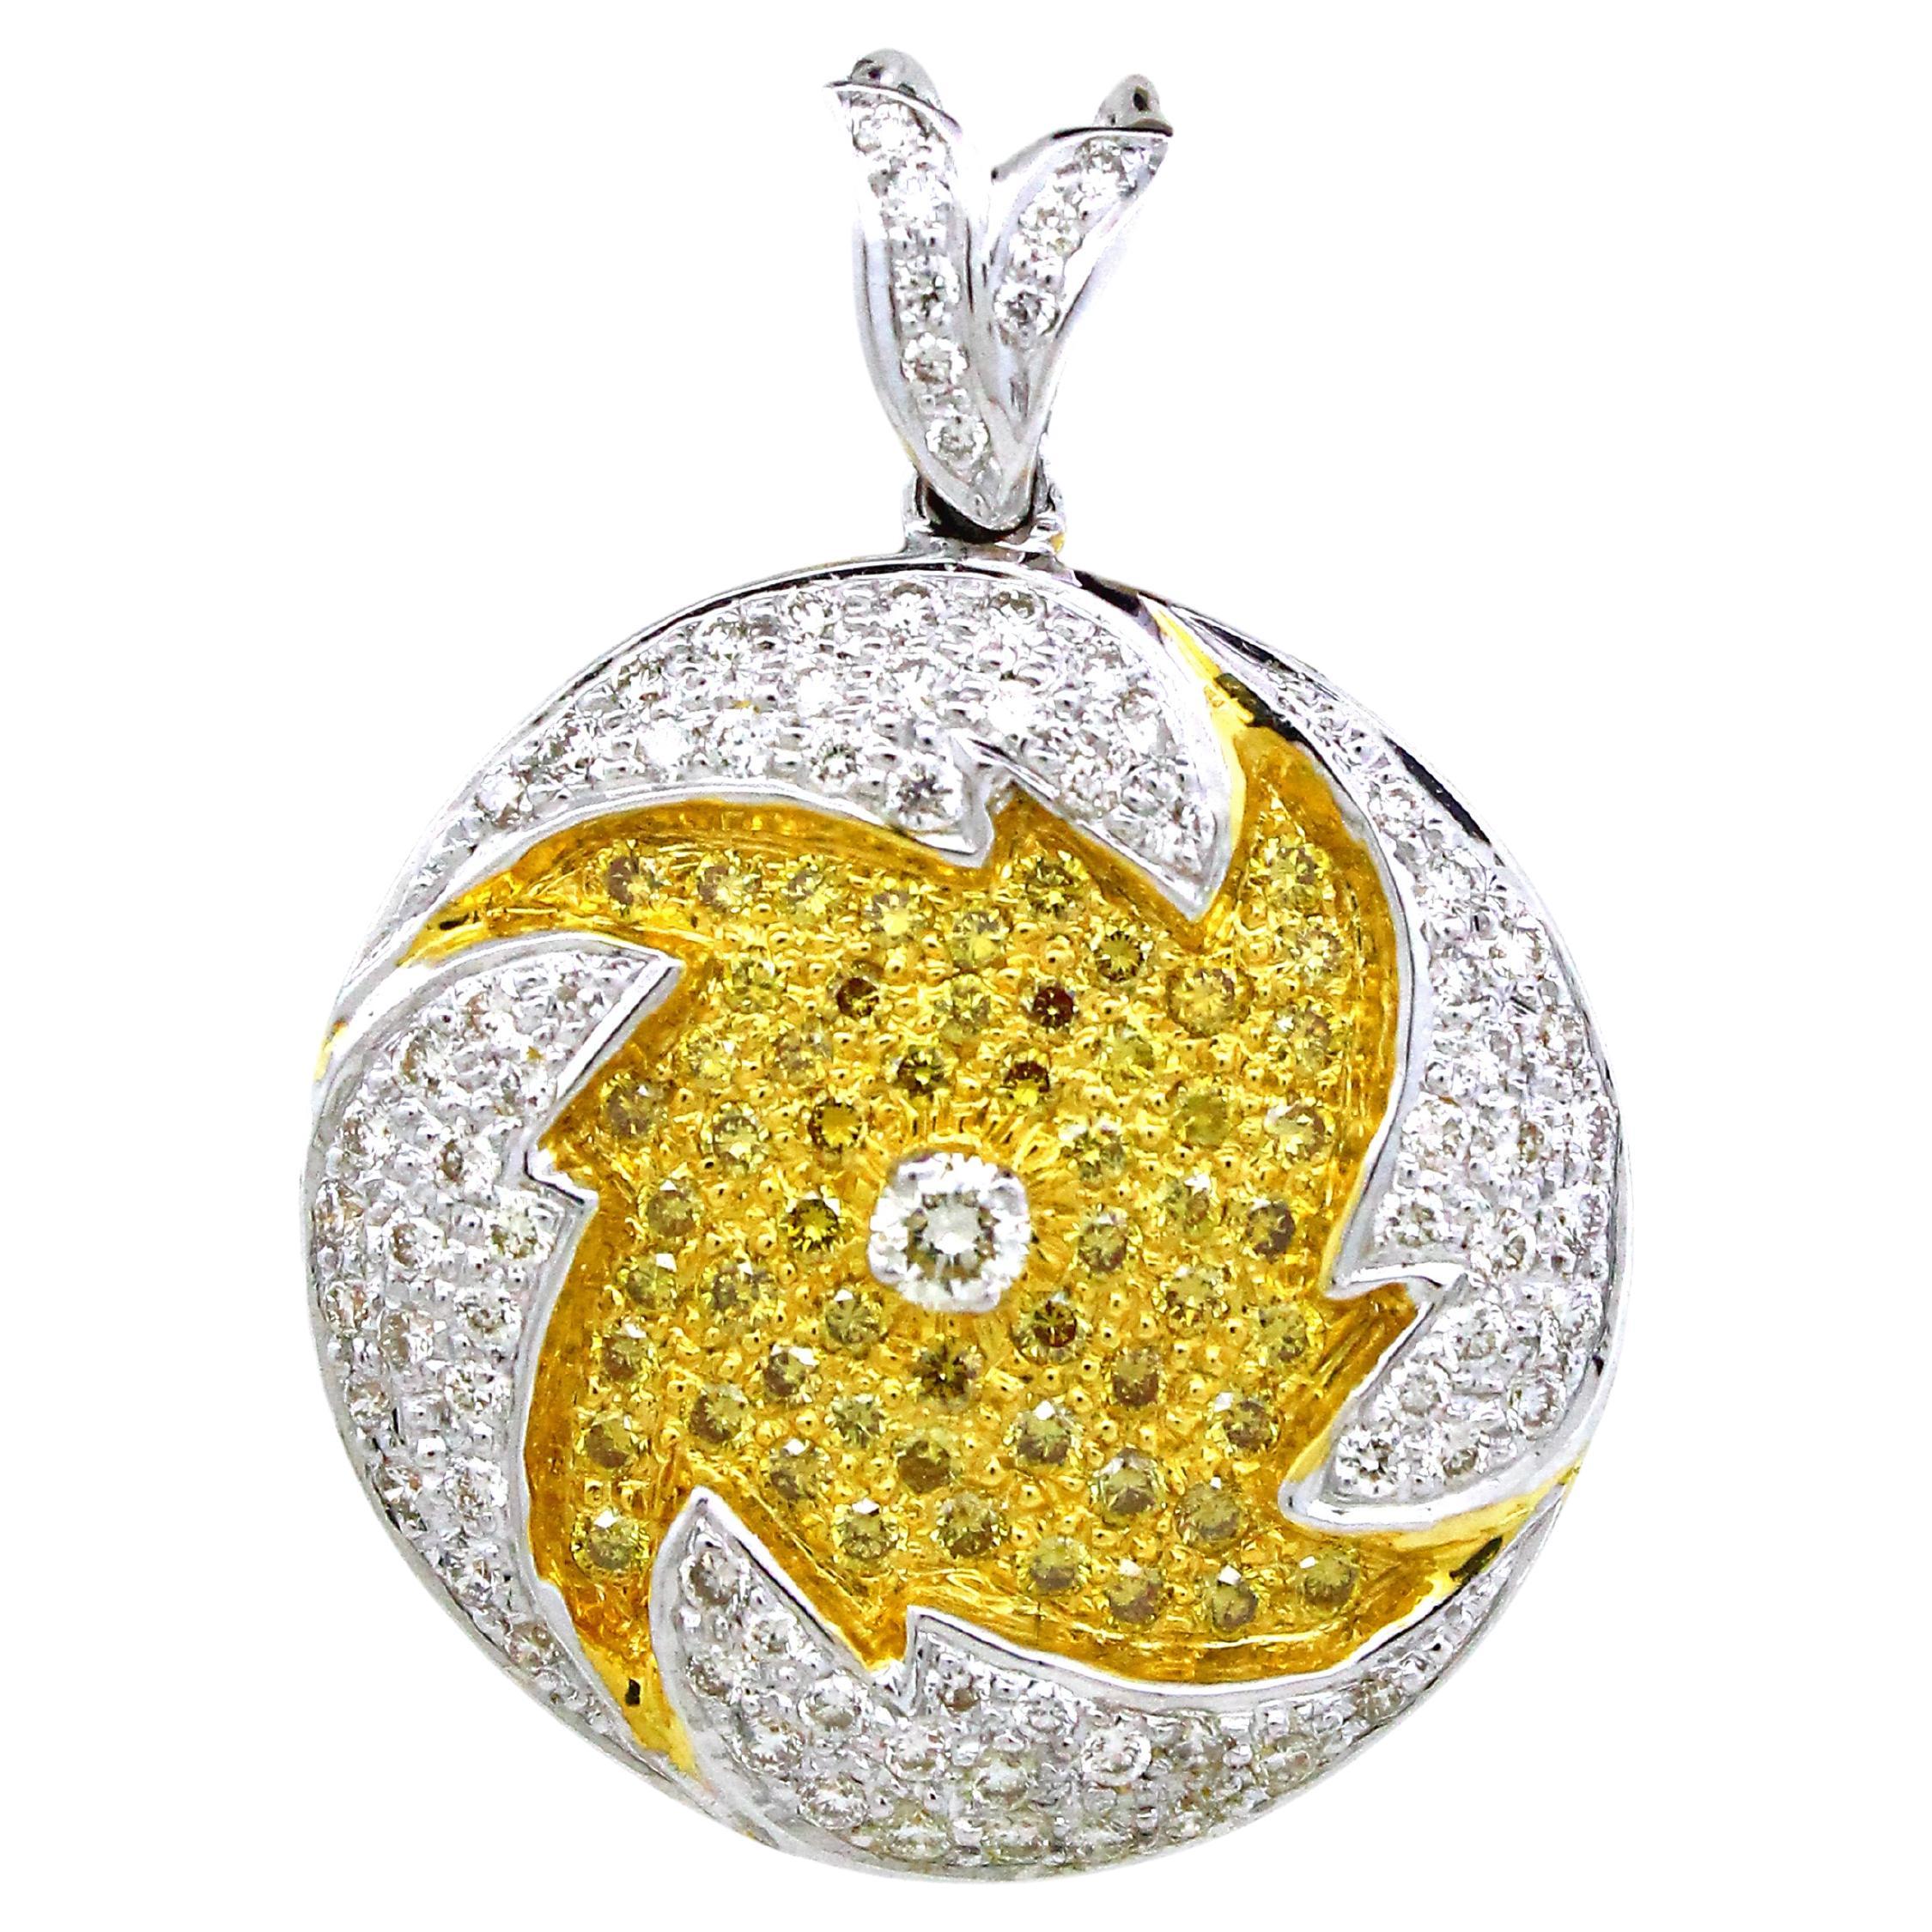 1.26 carats of yellow and white diamond Fire Goblet Pendant For Sale